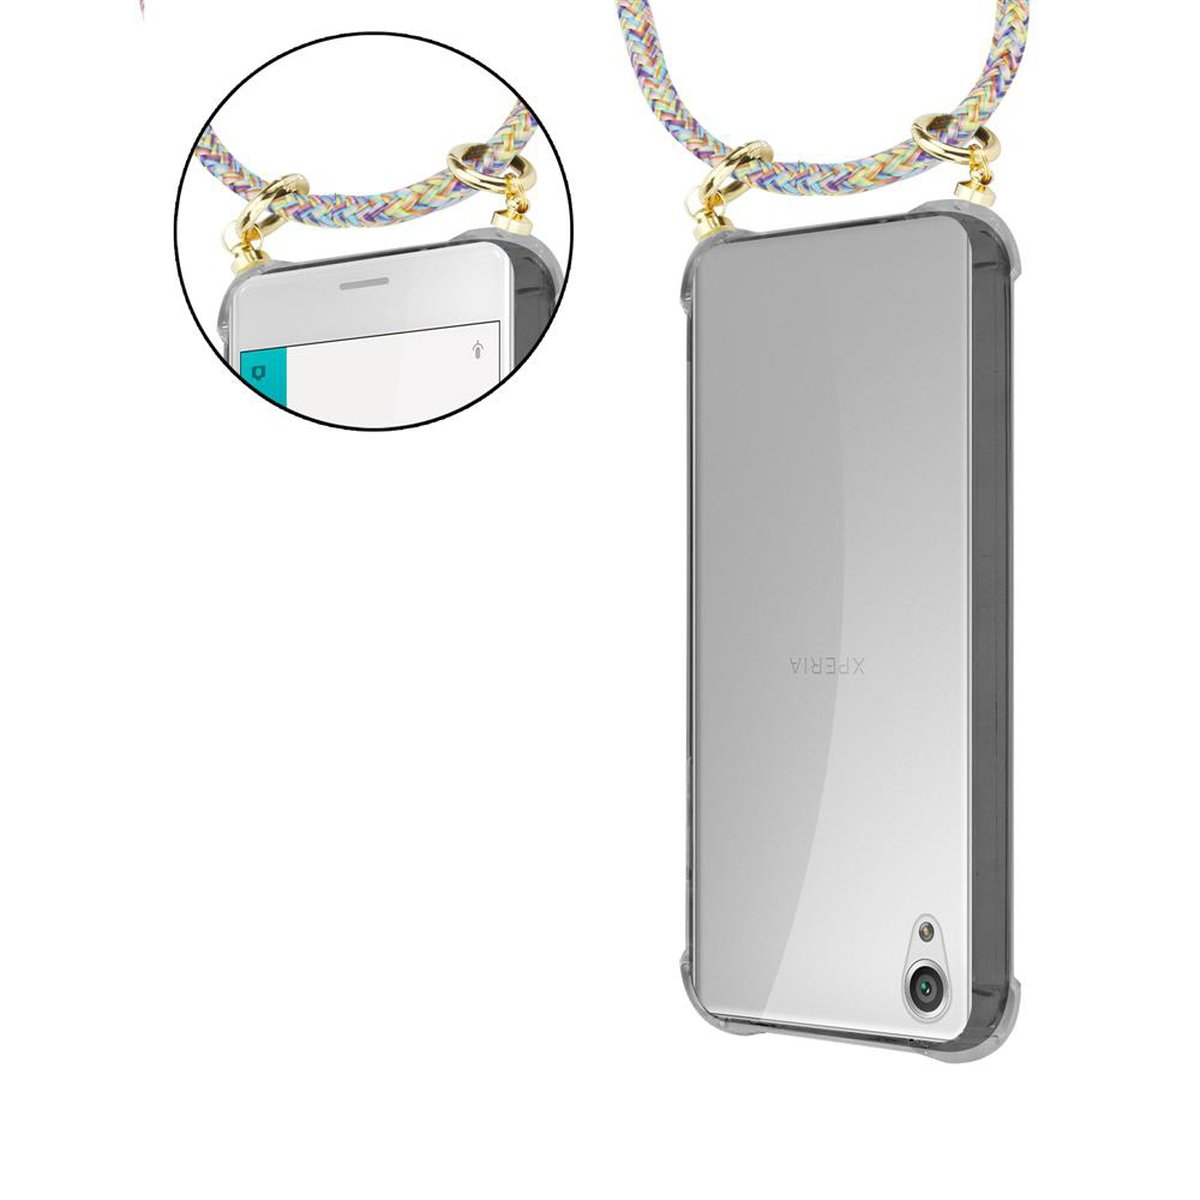 Kette abnehmbarer Band Xperia und Gold Kordel Sony, CADORABO Ringen, Handy mit Hülle, X, Backcover, RAINBOW